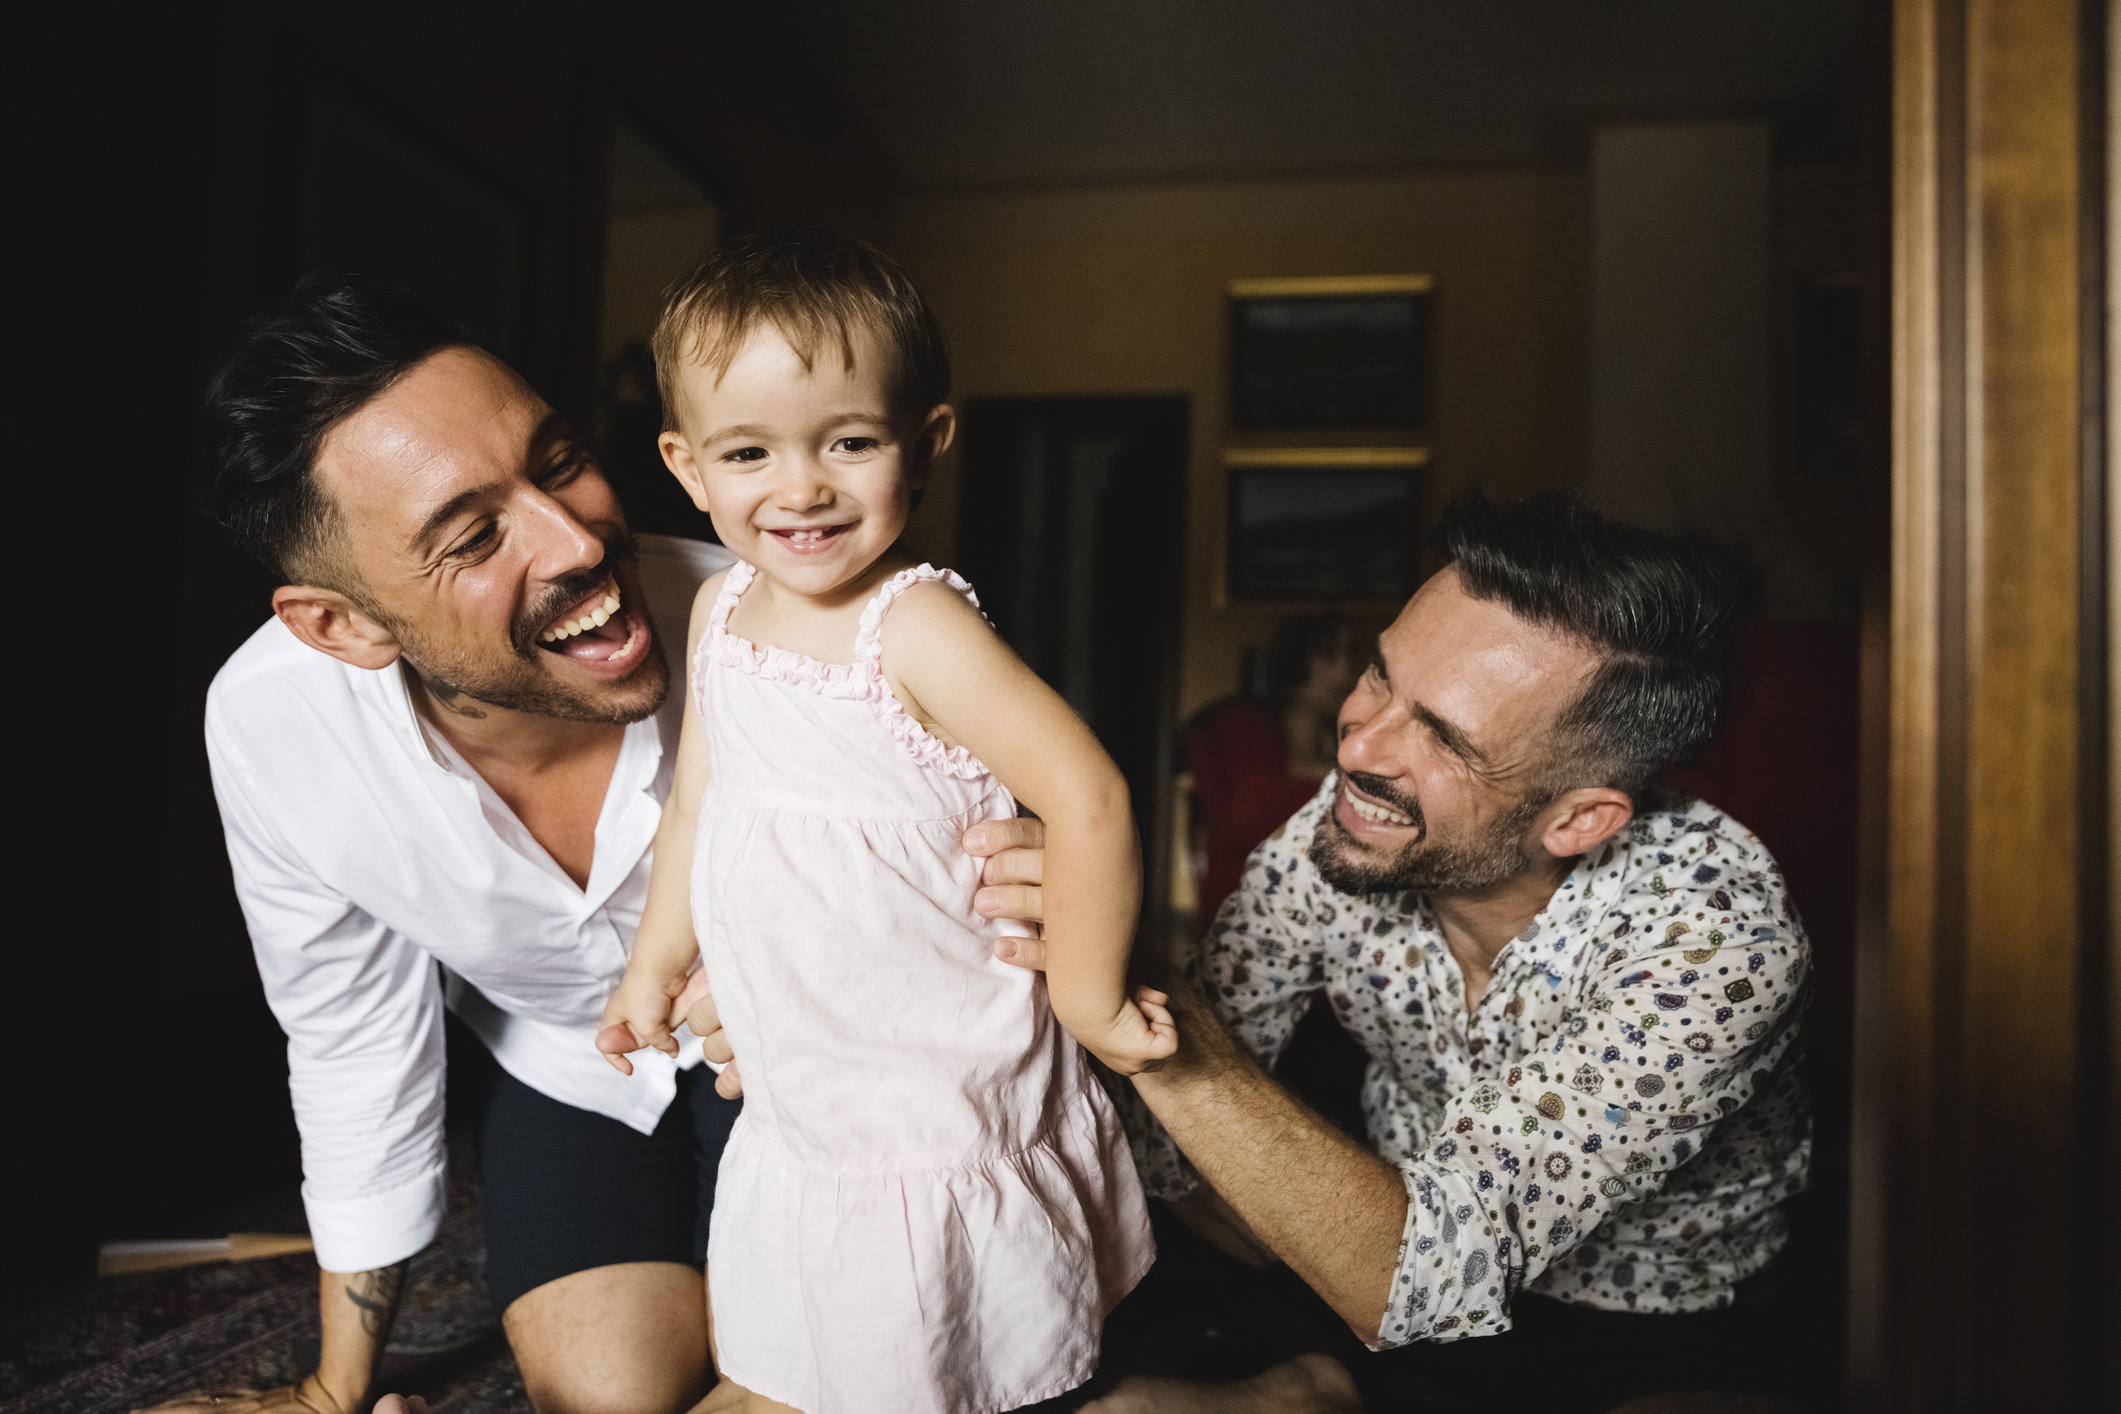 New research helps gay couples with family planning